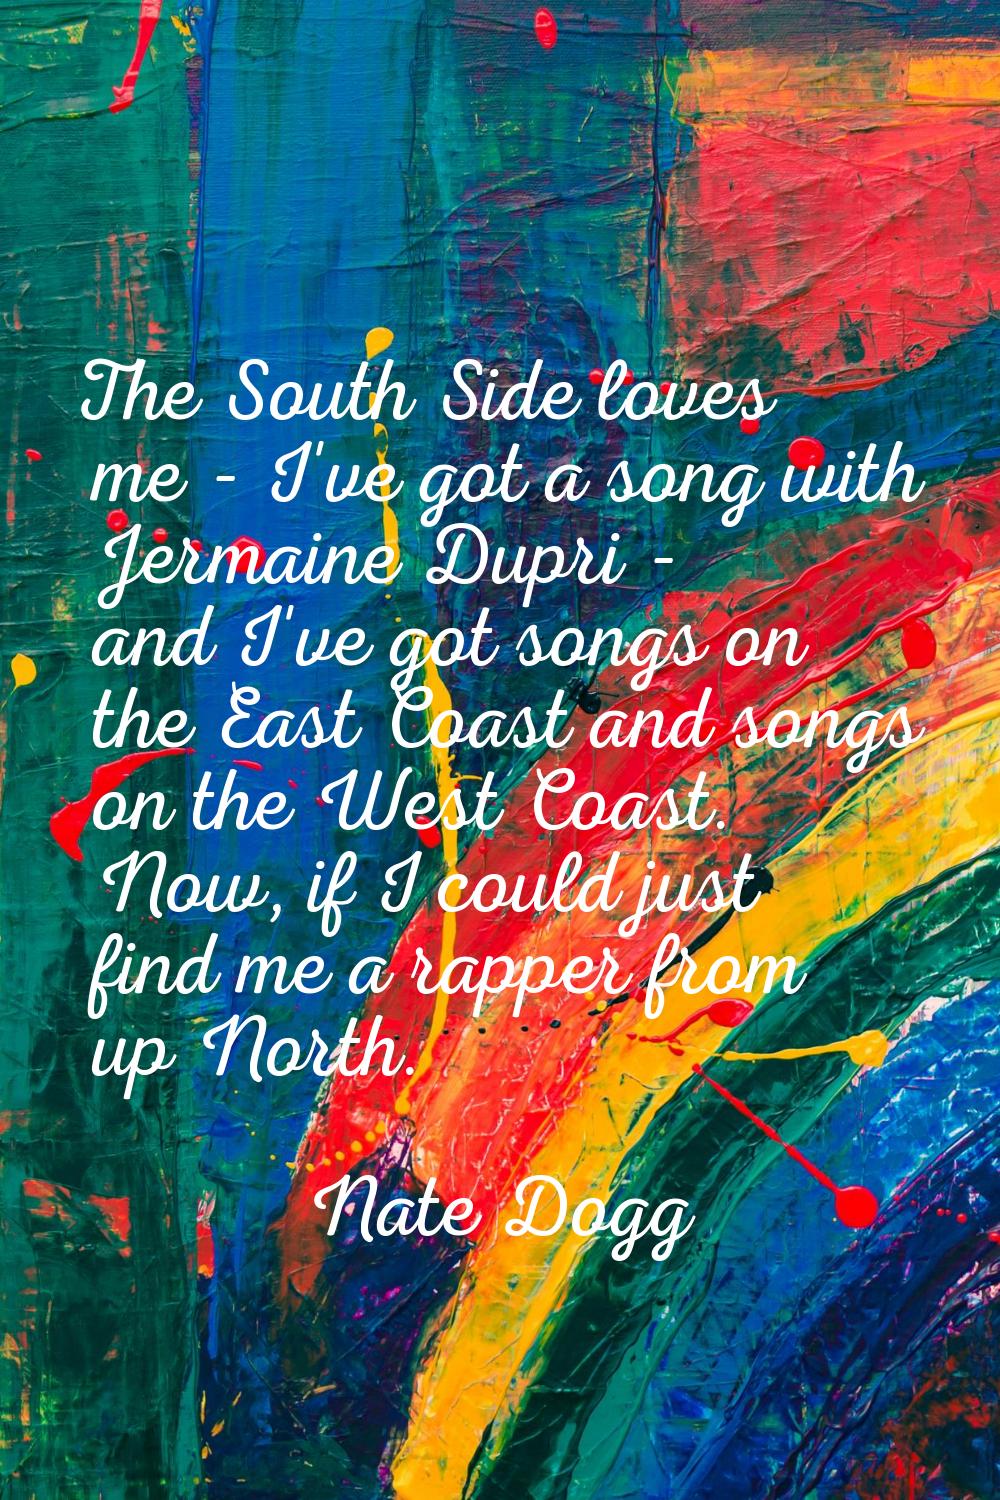 The South Side loves me - I've got a song with Jermaine Dupri - and I've got songs on the East Coas